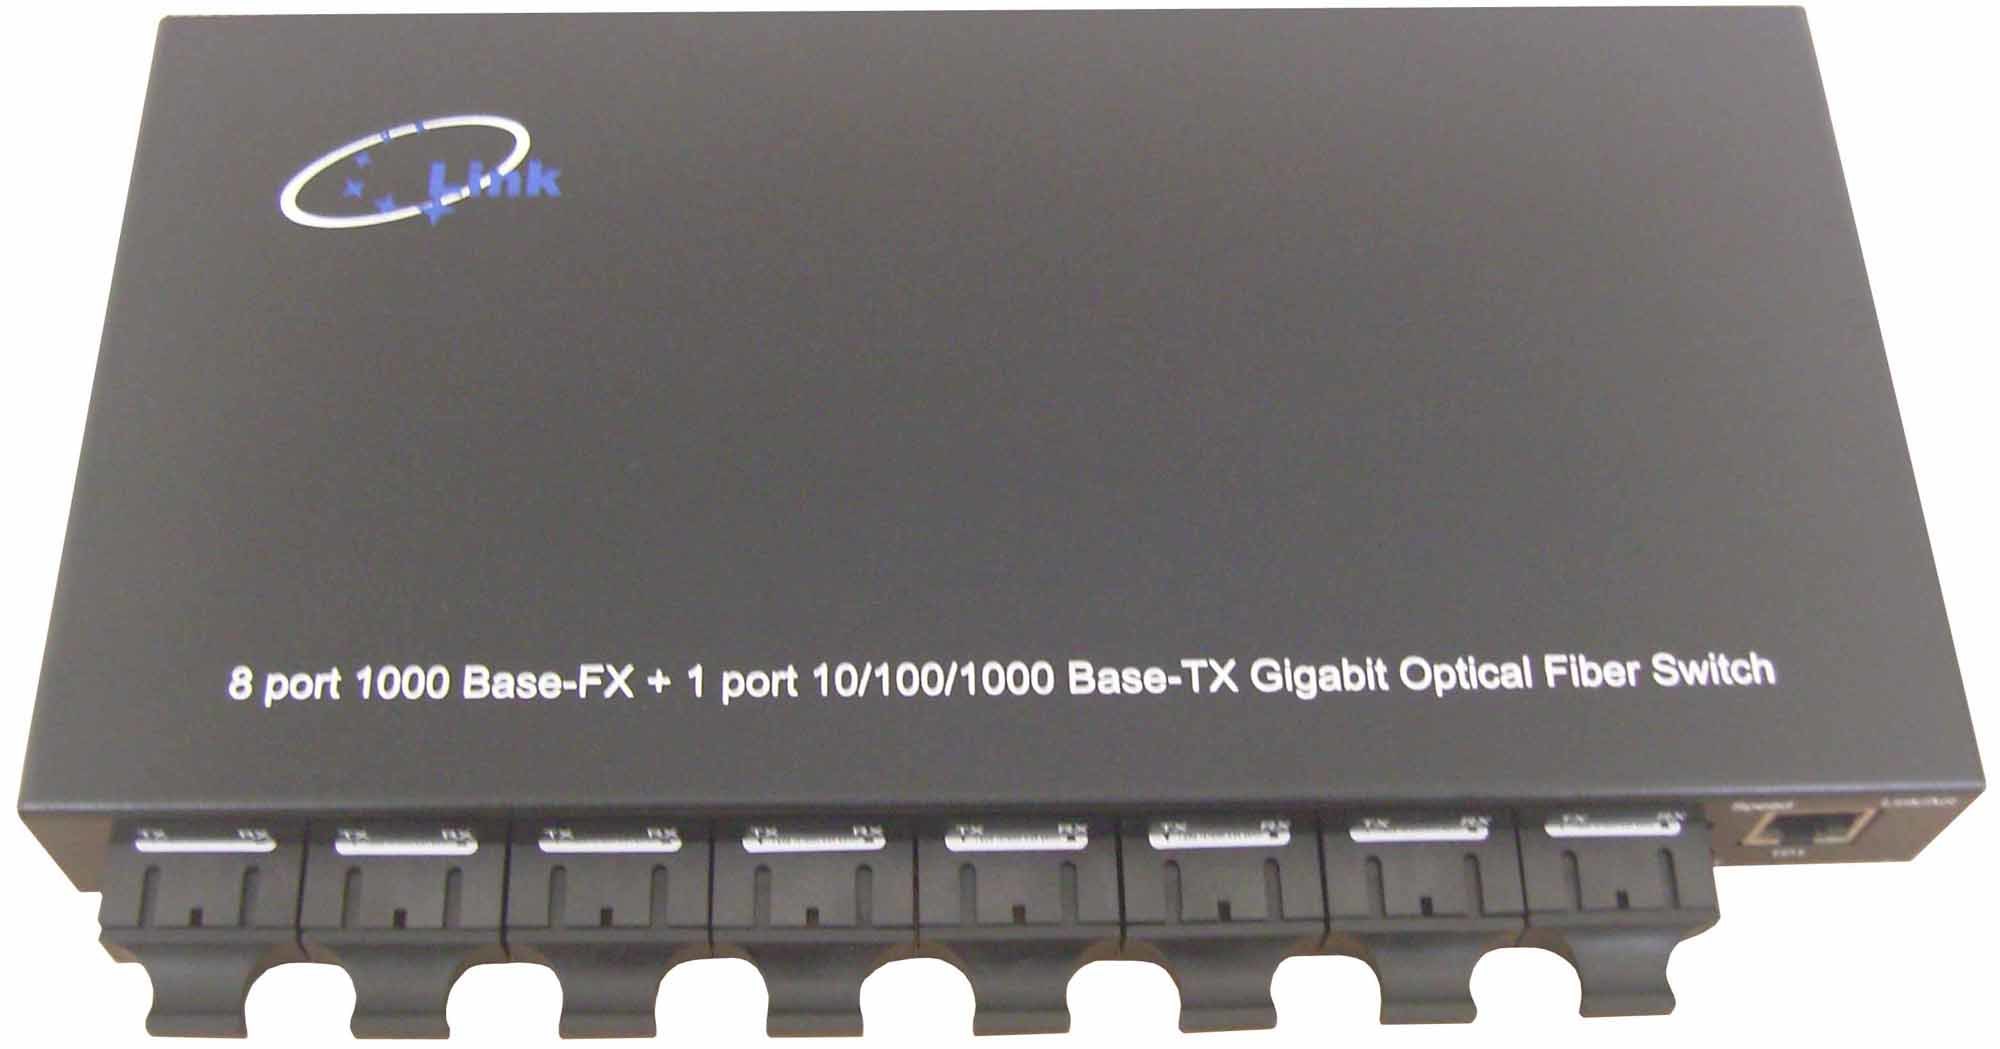 8port 1000 Base-Fx and 1 Port 10/100/1000 Base-Tx Ethernet Switch Apply FTTH FTTB